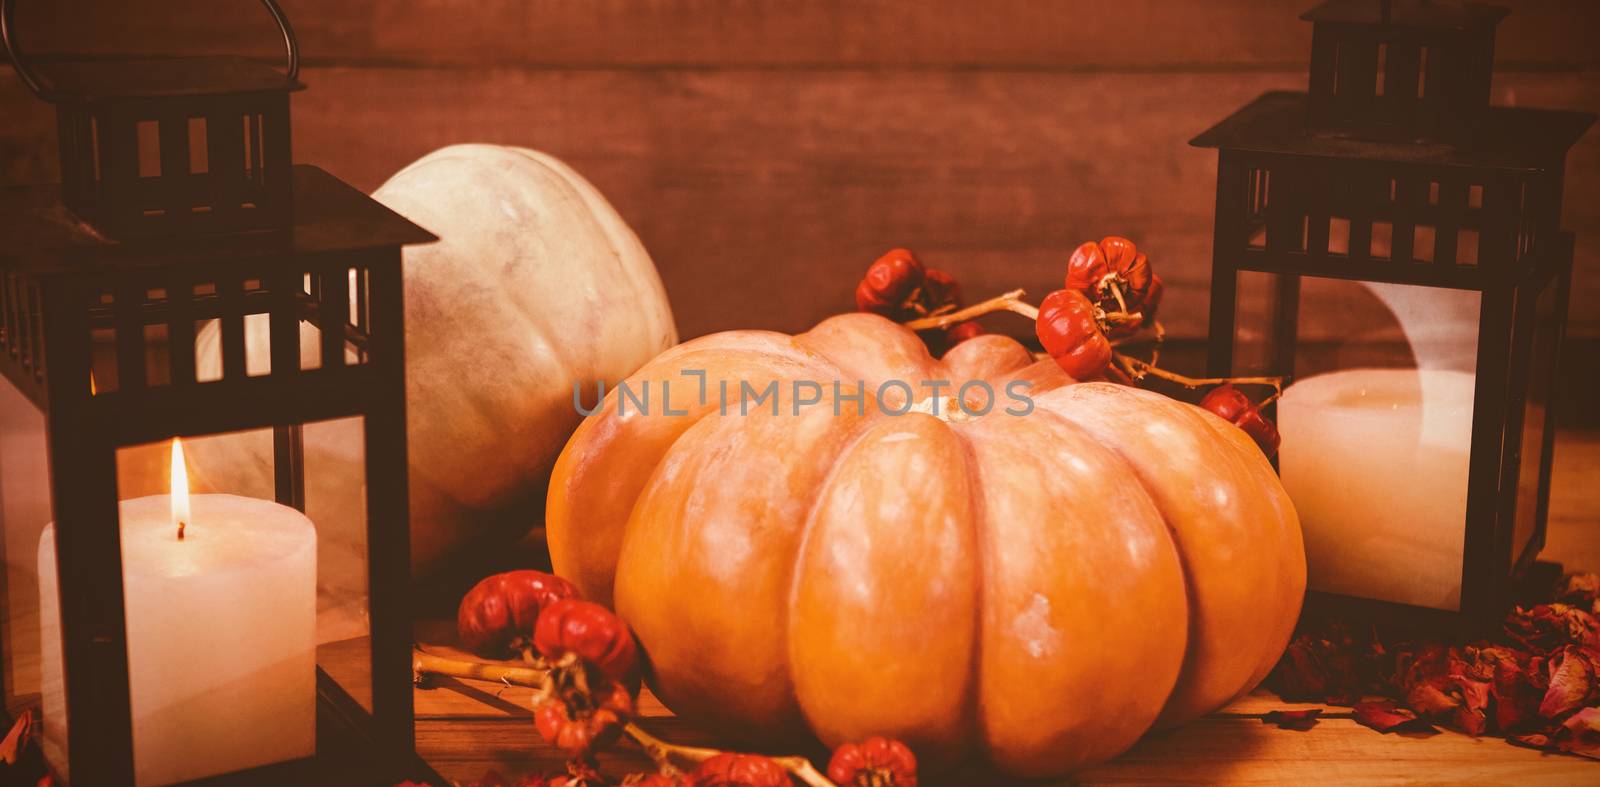 Pumpkins with candles on wooden table during Halloween